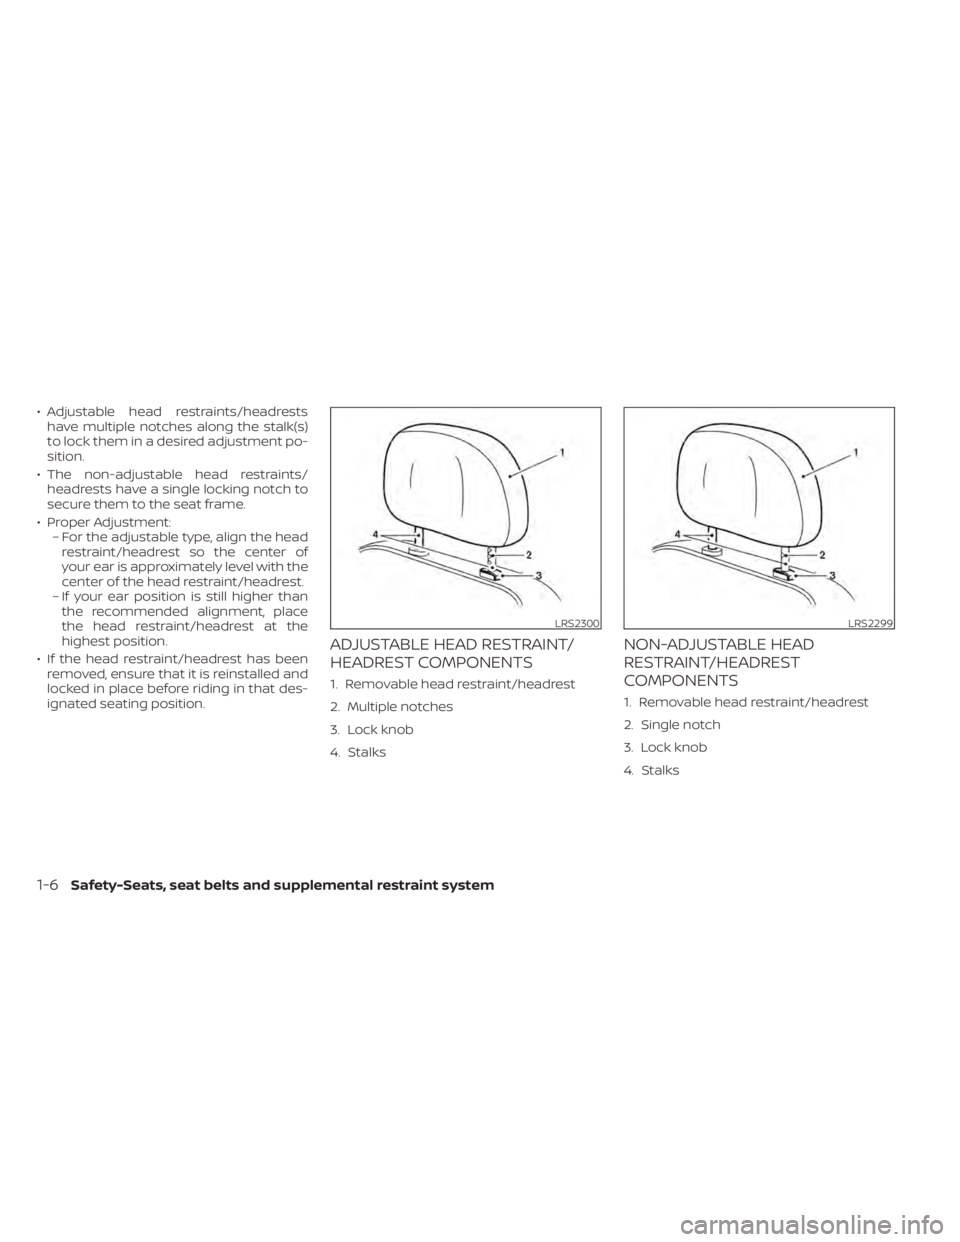 NISSAN KICKS 2022  Owners Manual • Adjustable head restraints/headrestshave multiple notches along the stalk(s)
to lock them in a desired adjustment po-
sition.
• The non-adjustable head restraints/ headrests have a single lockin